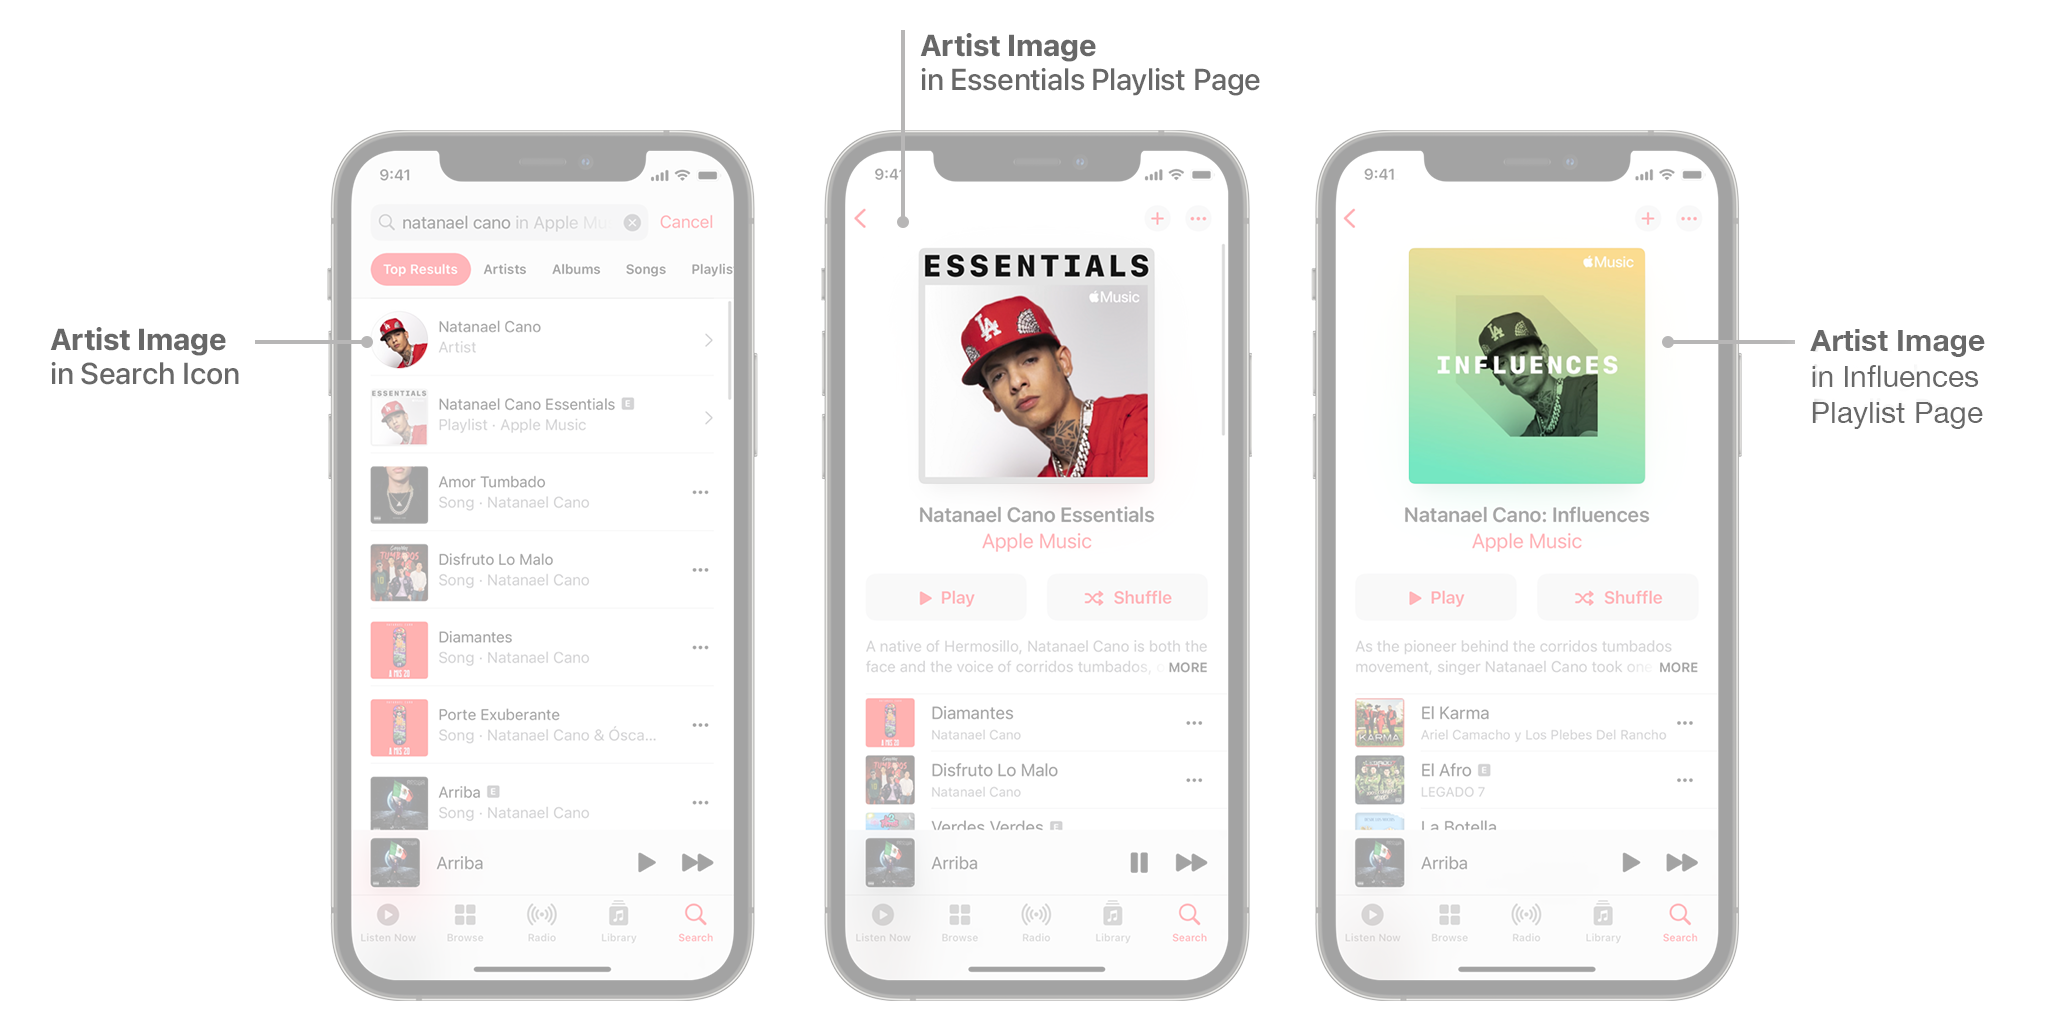 Examples displaying where an Artist Image appears on Apple Music, including in a search icon, Essentials cover, and Influences cover.